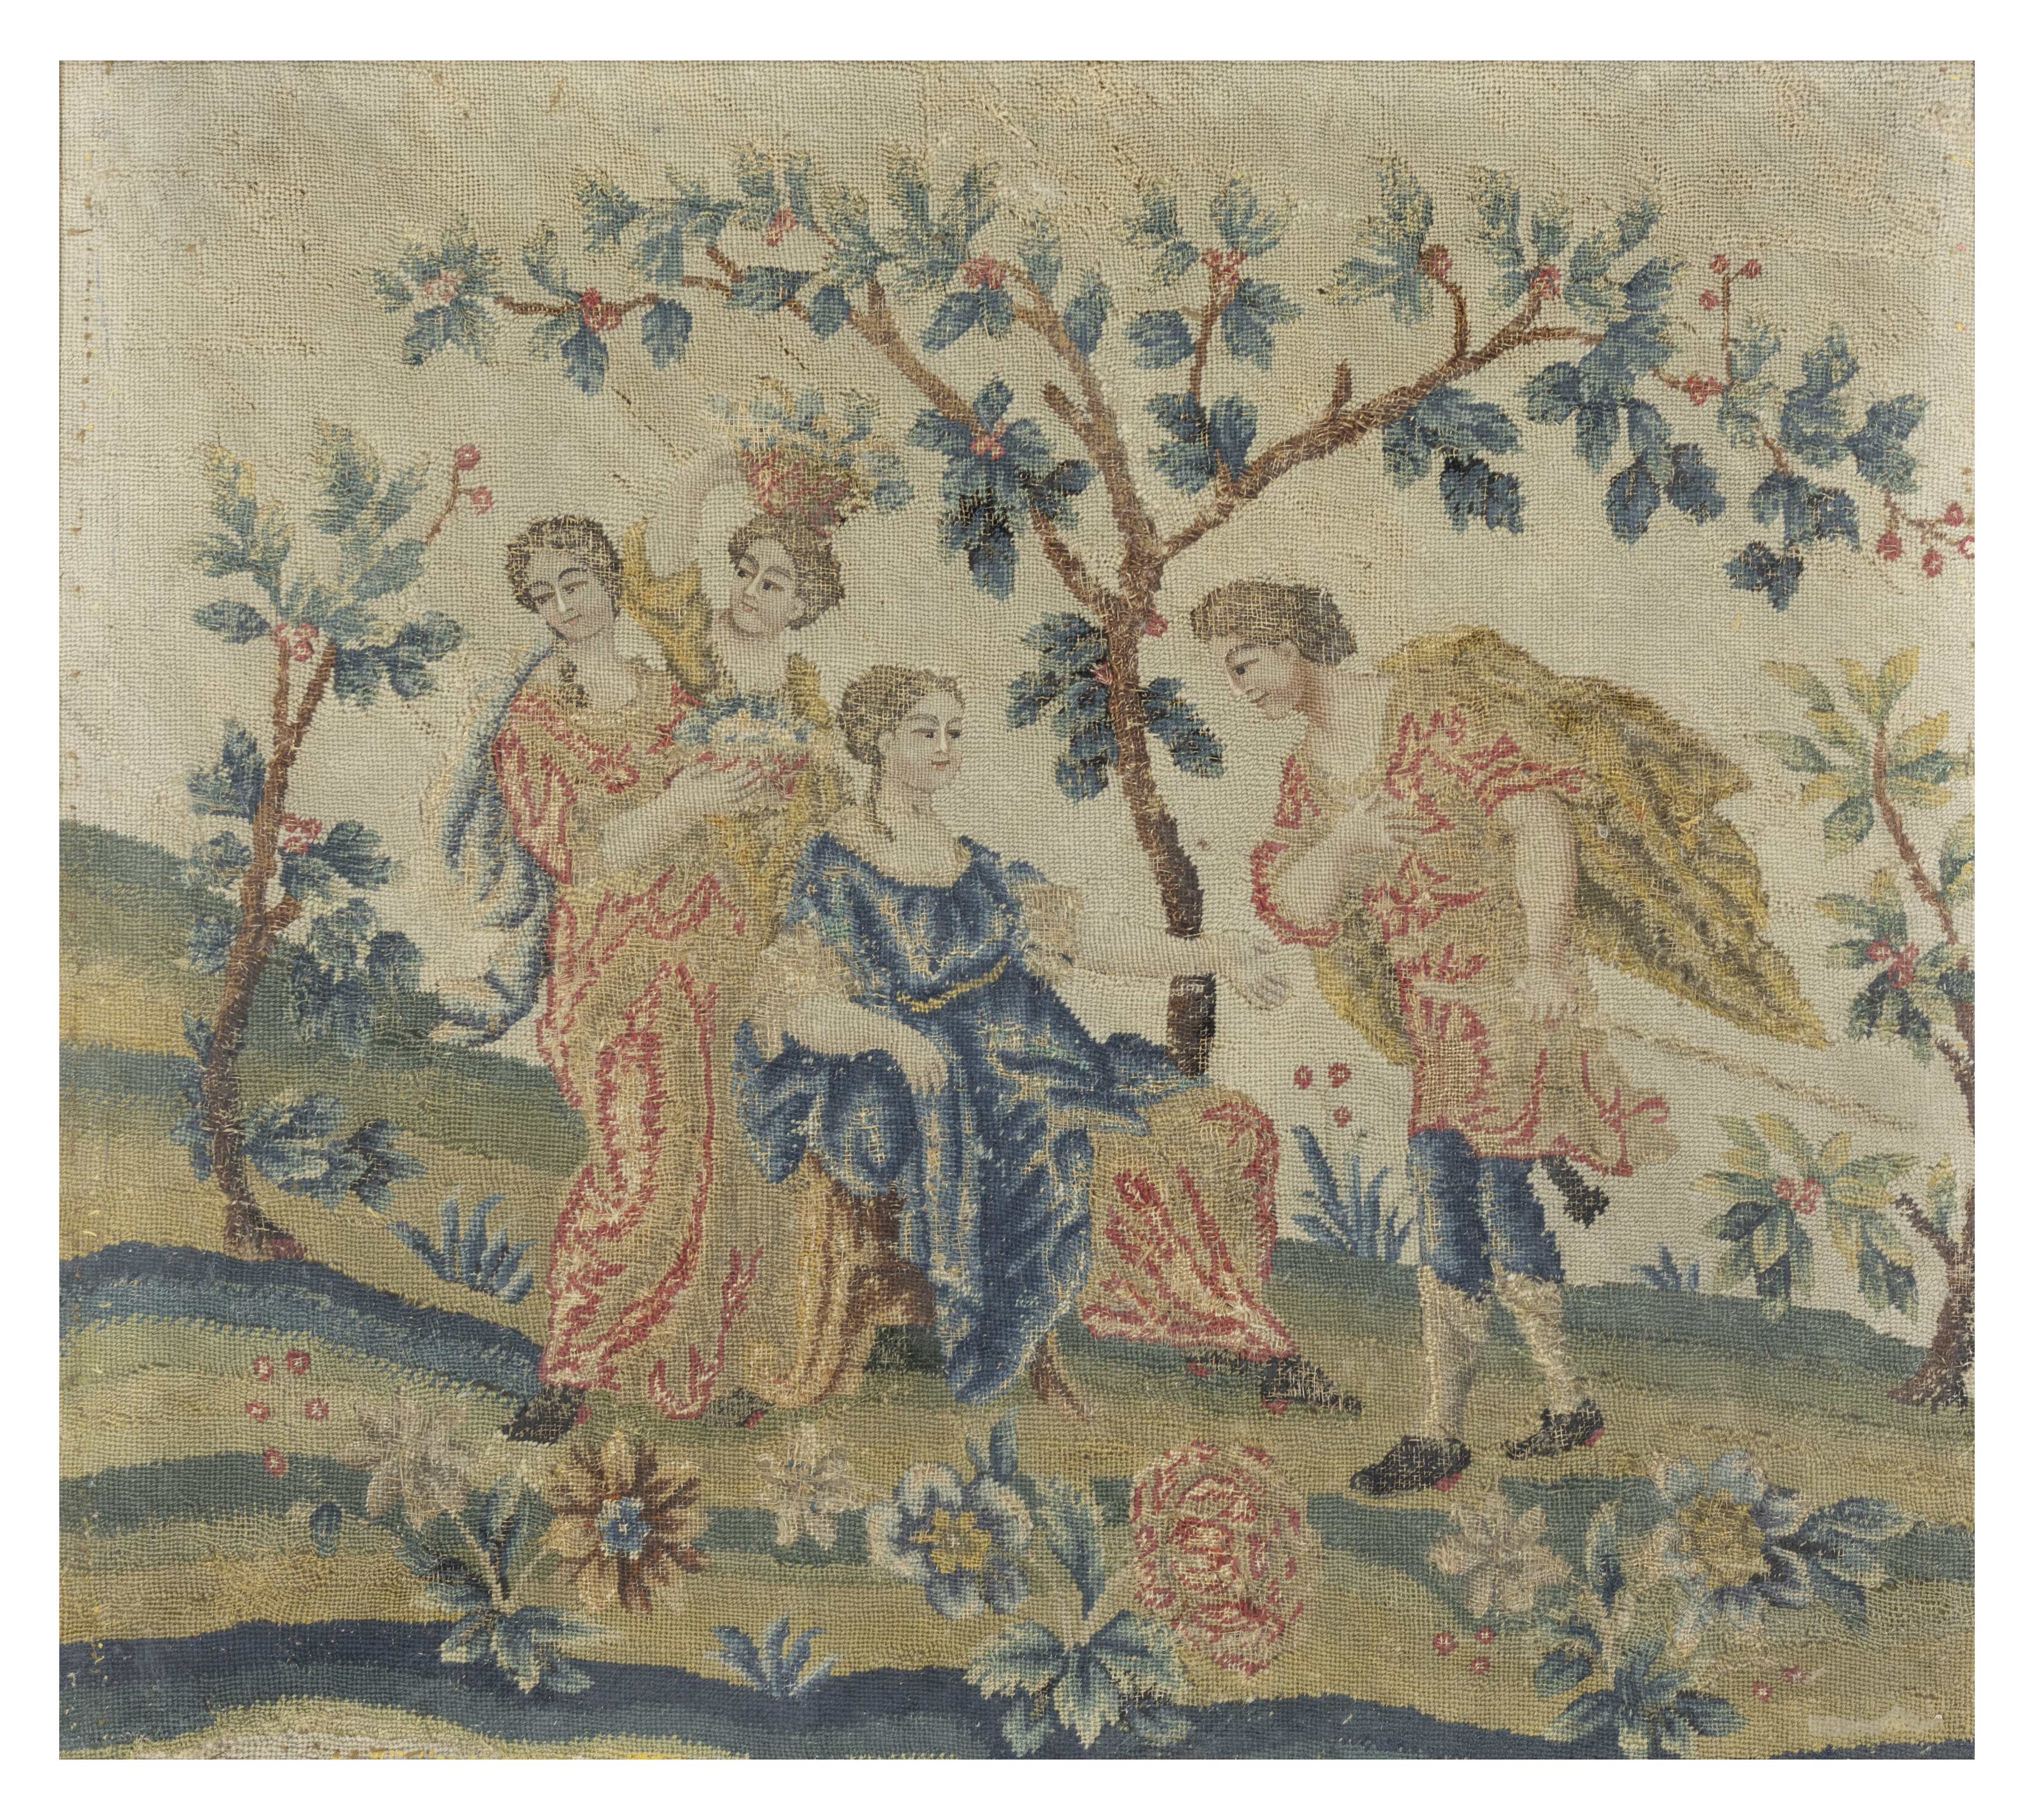 Two French needlework fragments, First half 18th century, Worked in wools and silks, one depictin... - Image 4 of 5